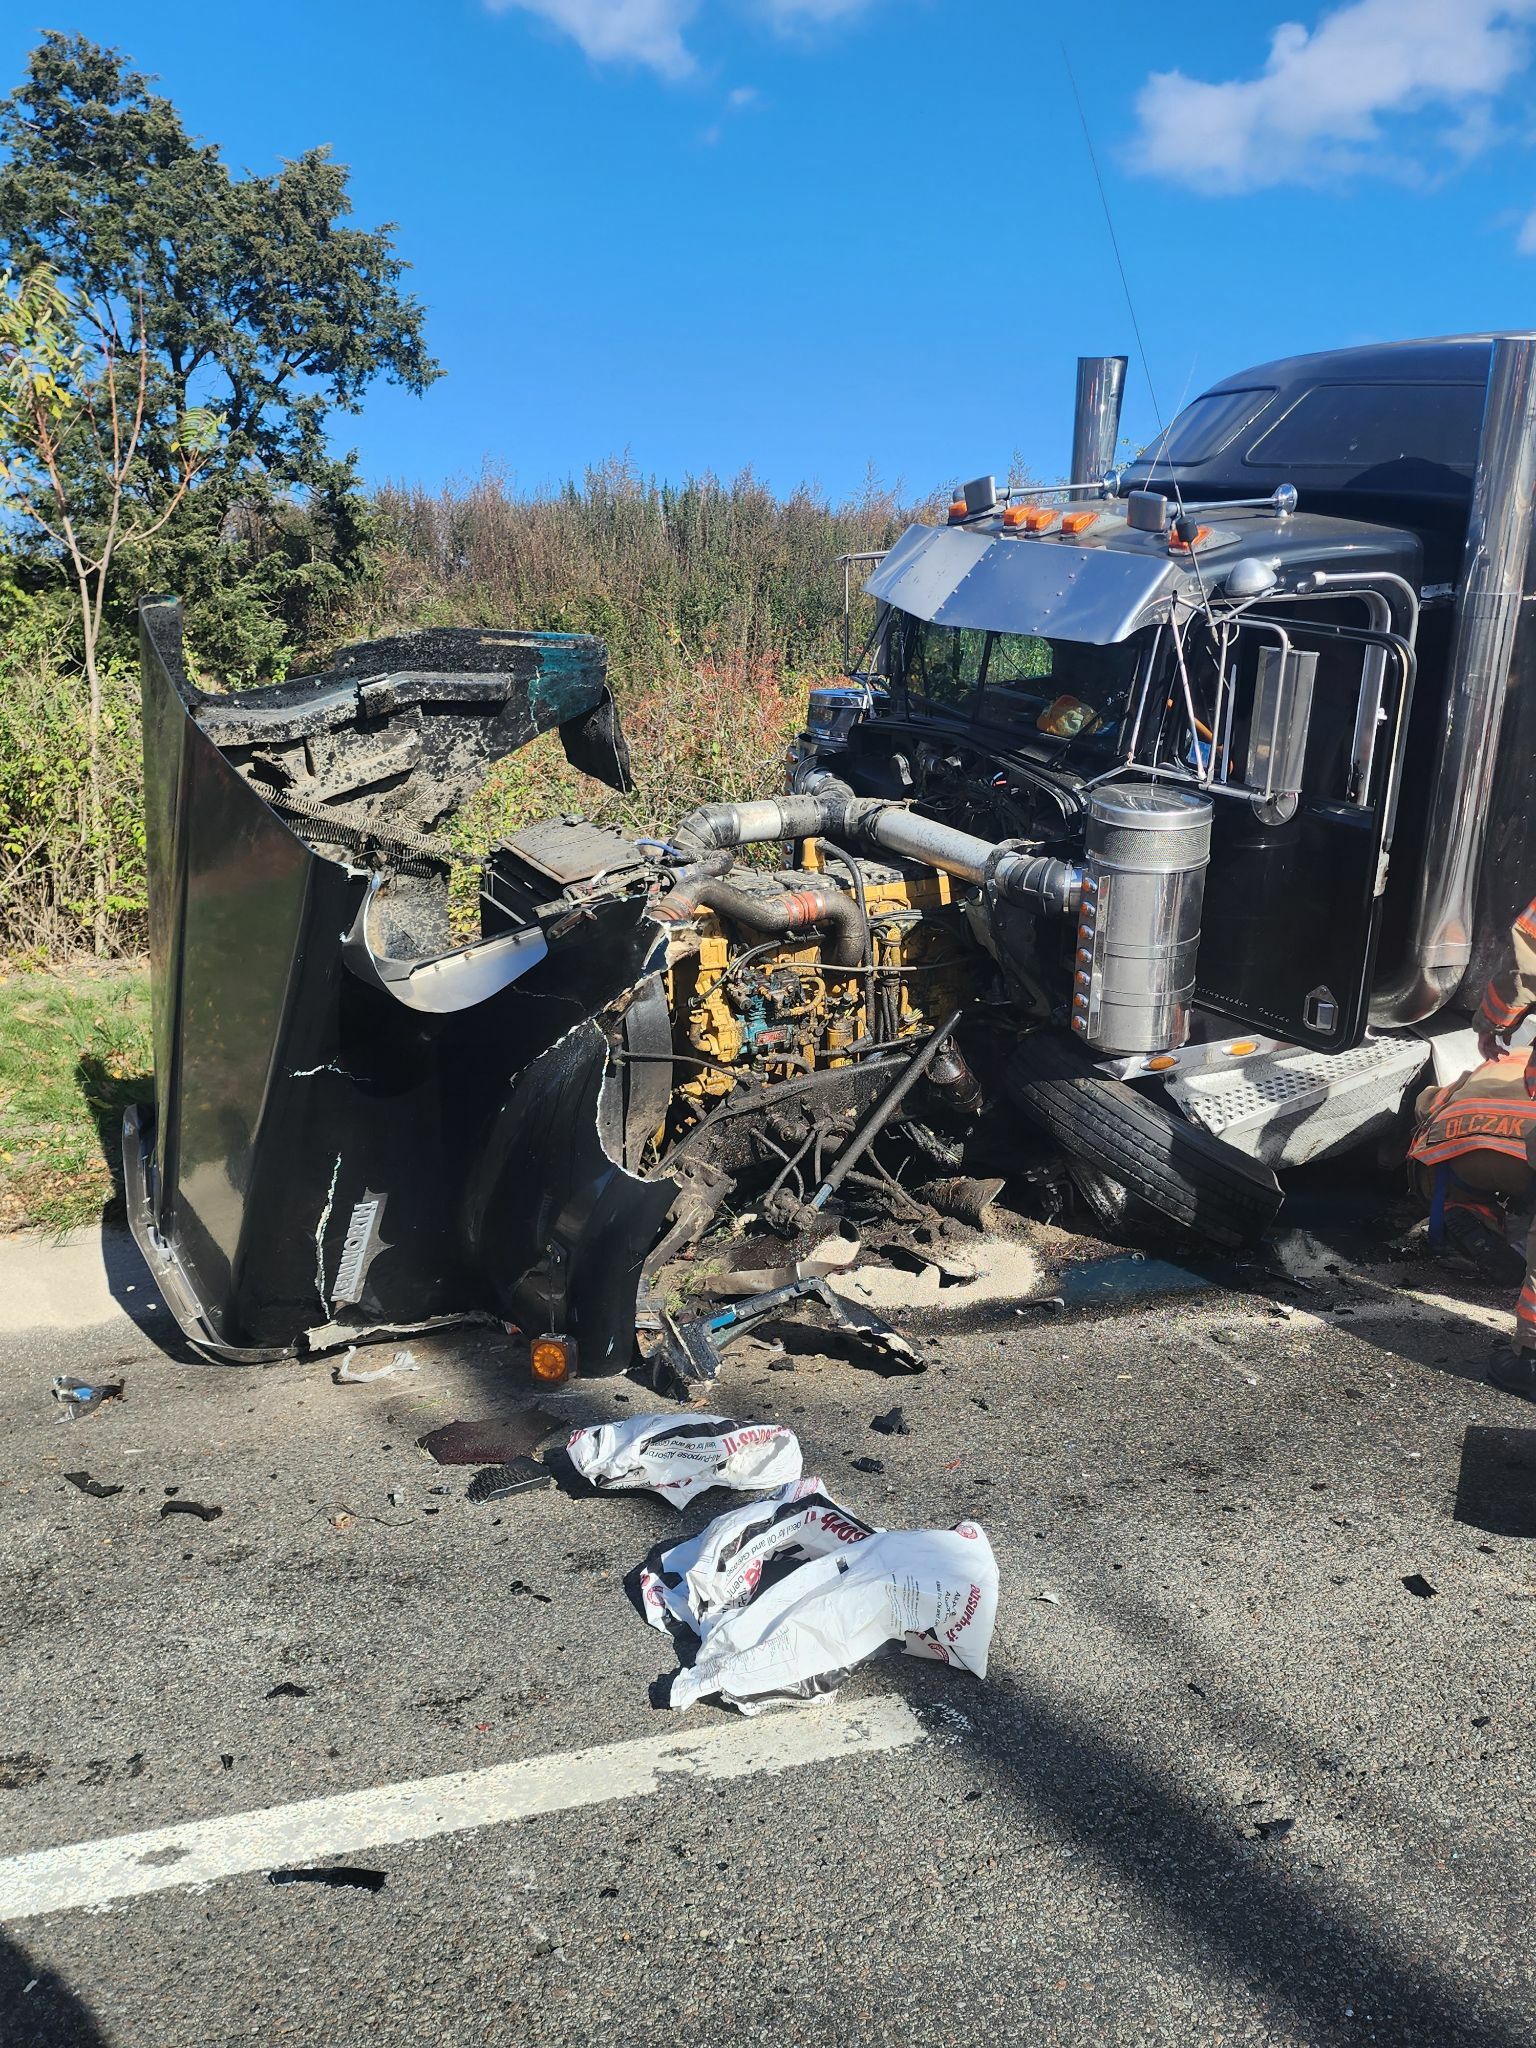 The impact popped the hood of the tractor trailer in the multi-car crash on County Road 39 in Southampton.    COURTESY LAMAR ROBINSON